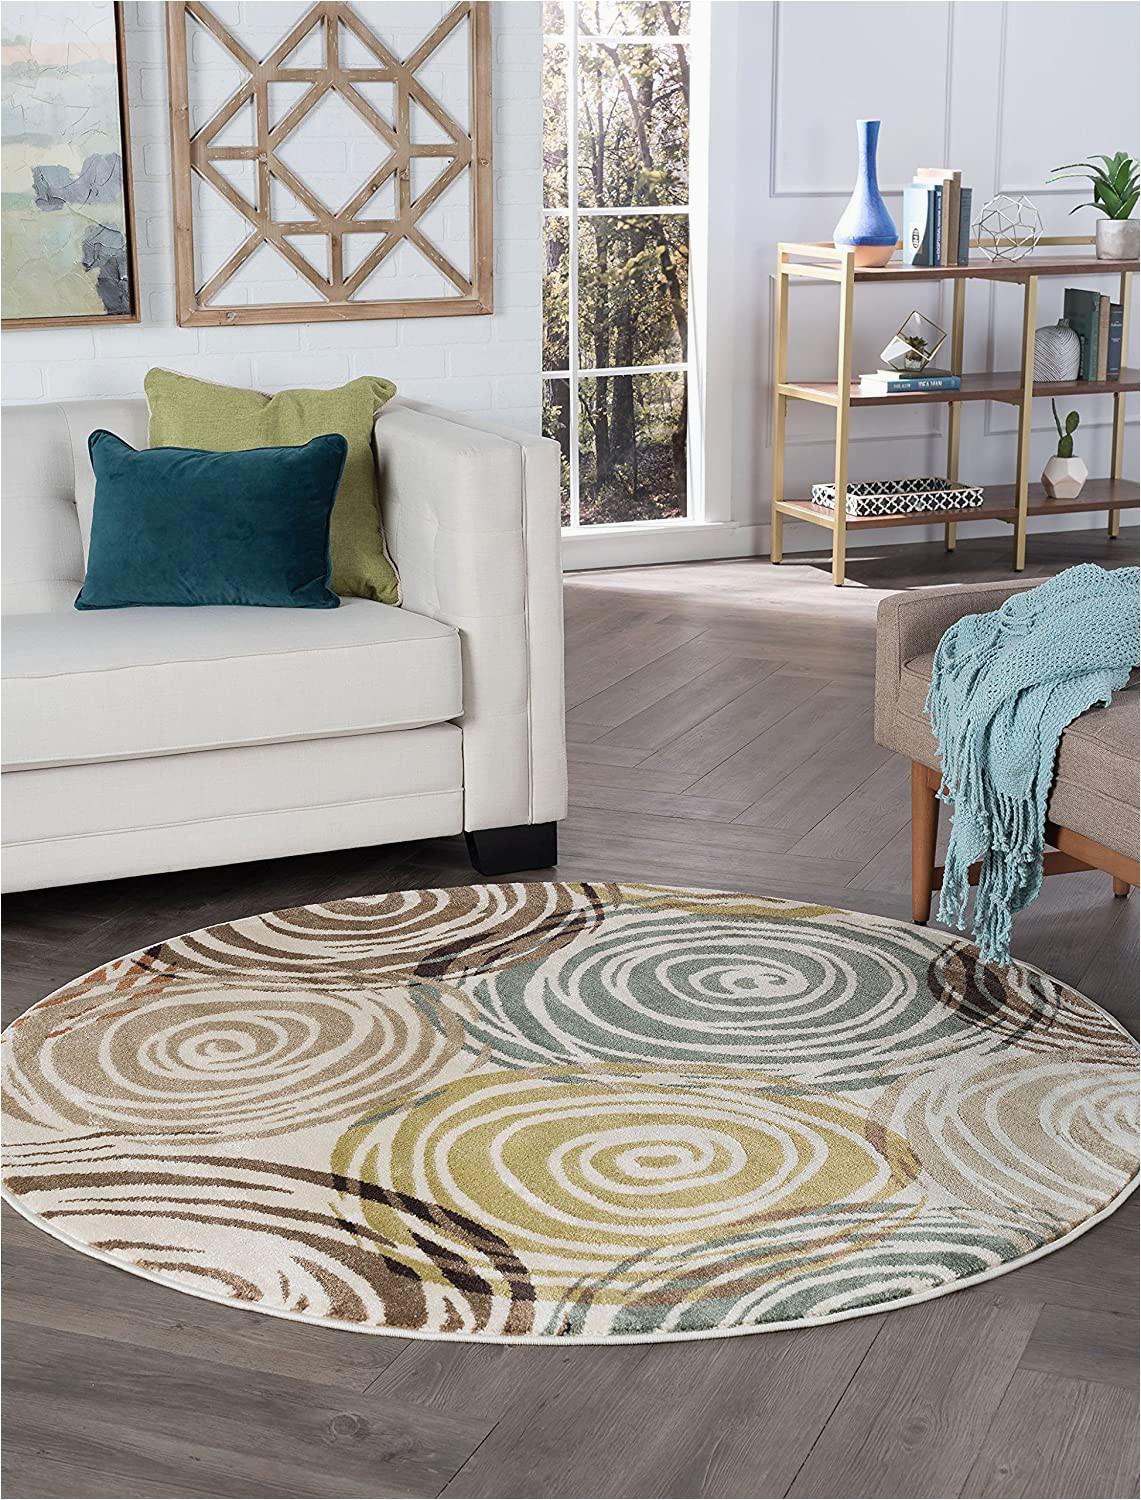 3 Ft Round area Rugs Buy Ivory 5 3 Round Universal Rugs Contemporary